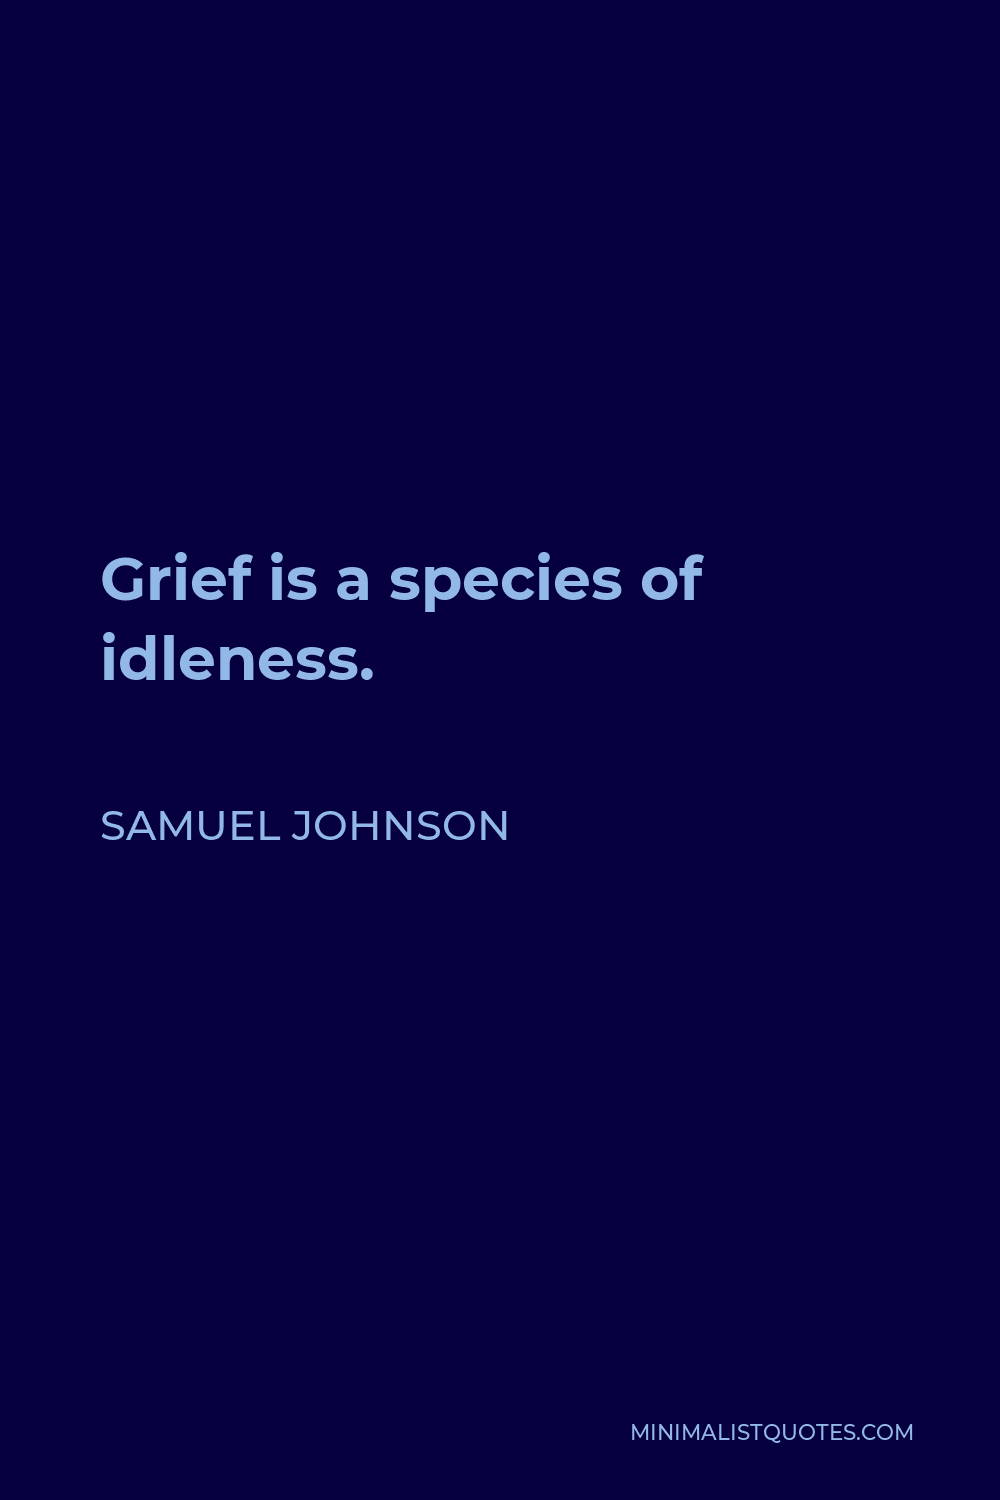 Samuel Johnson Quote - Grief is a species of idleness.